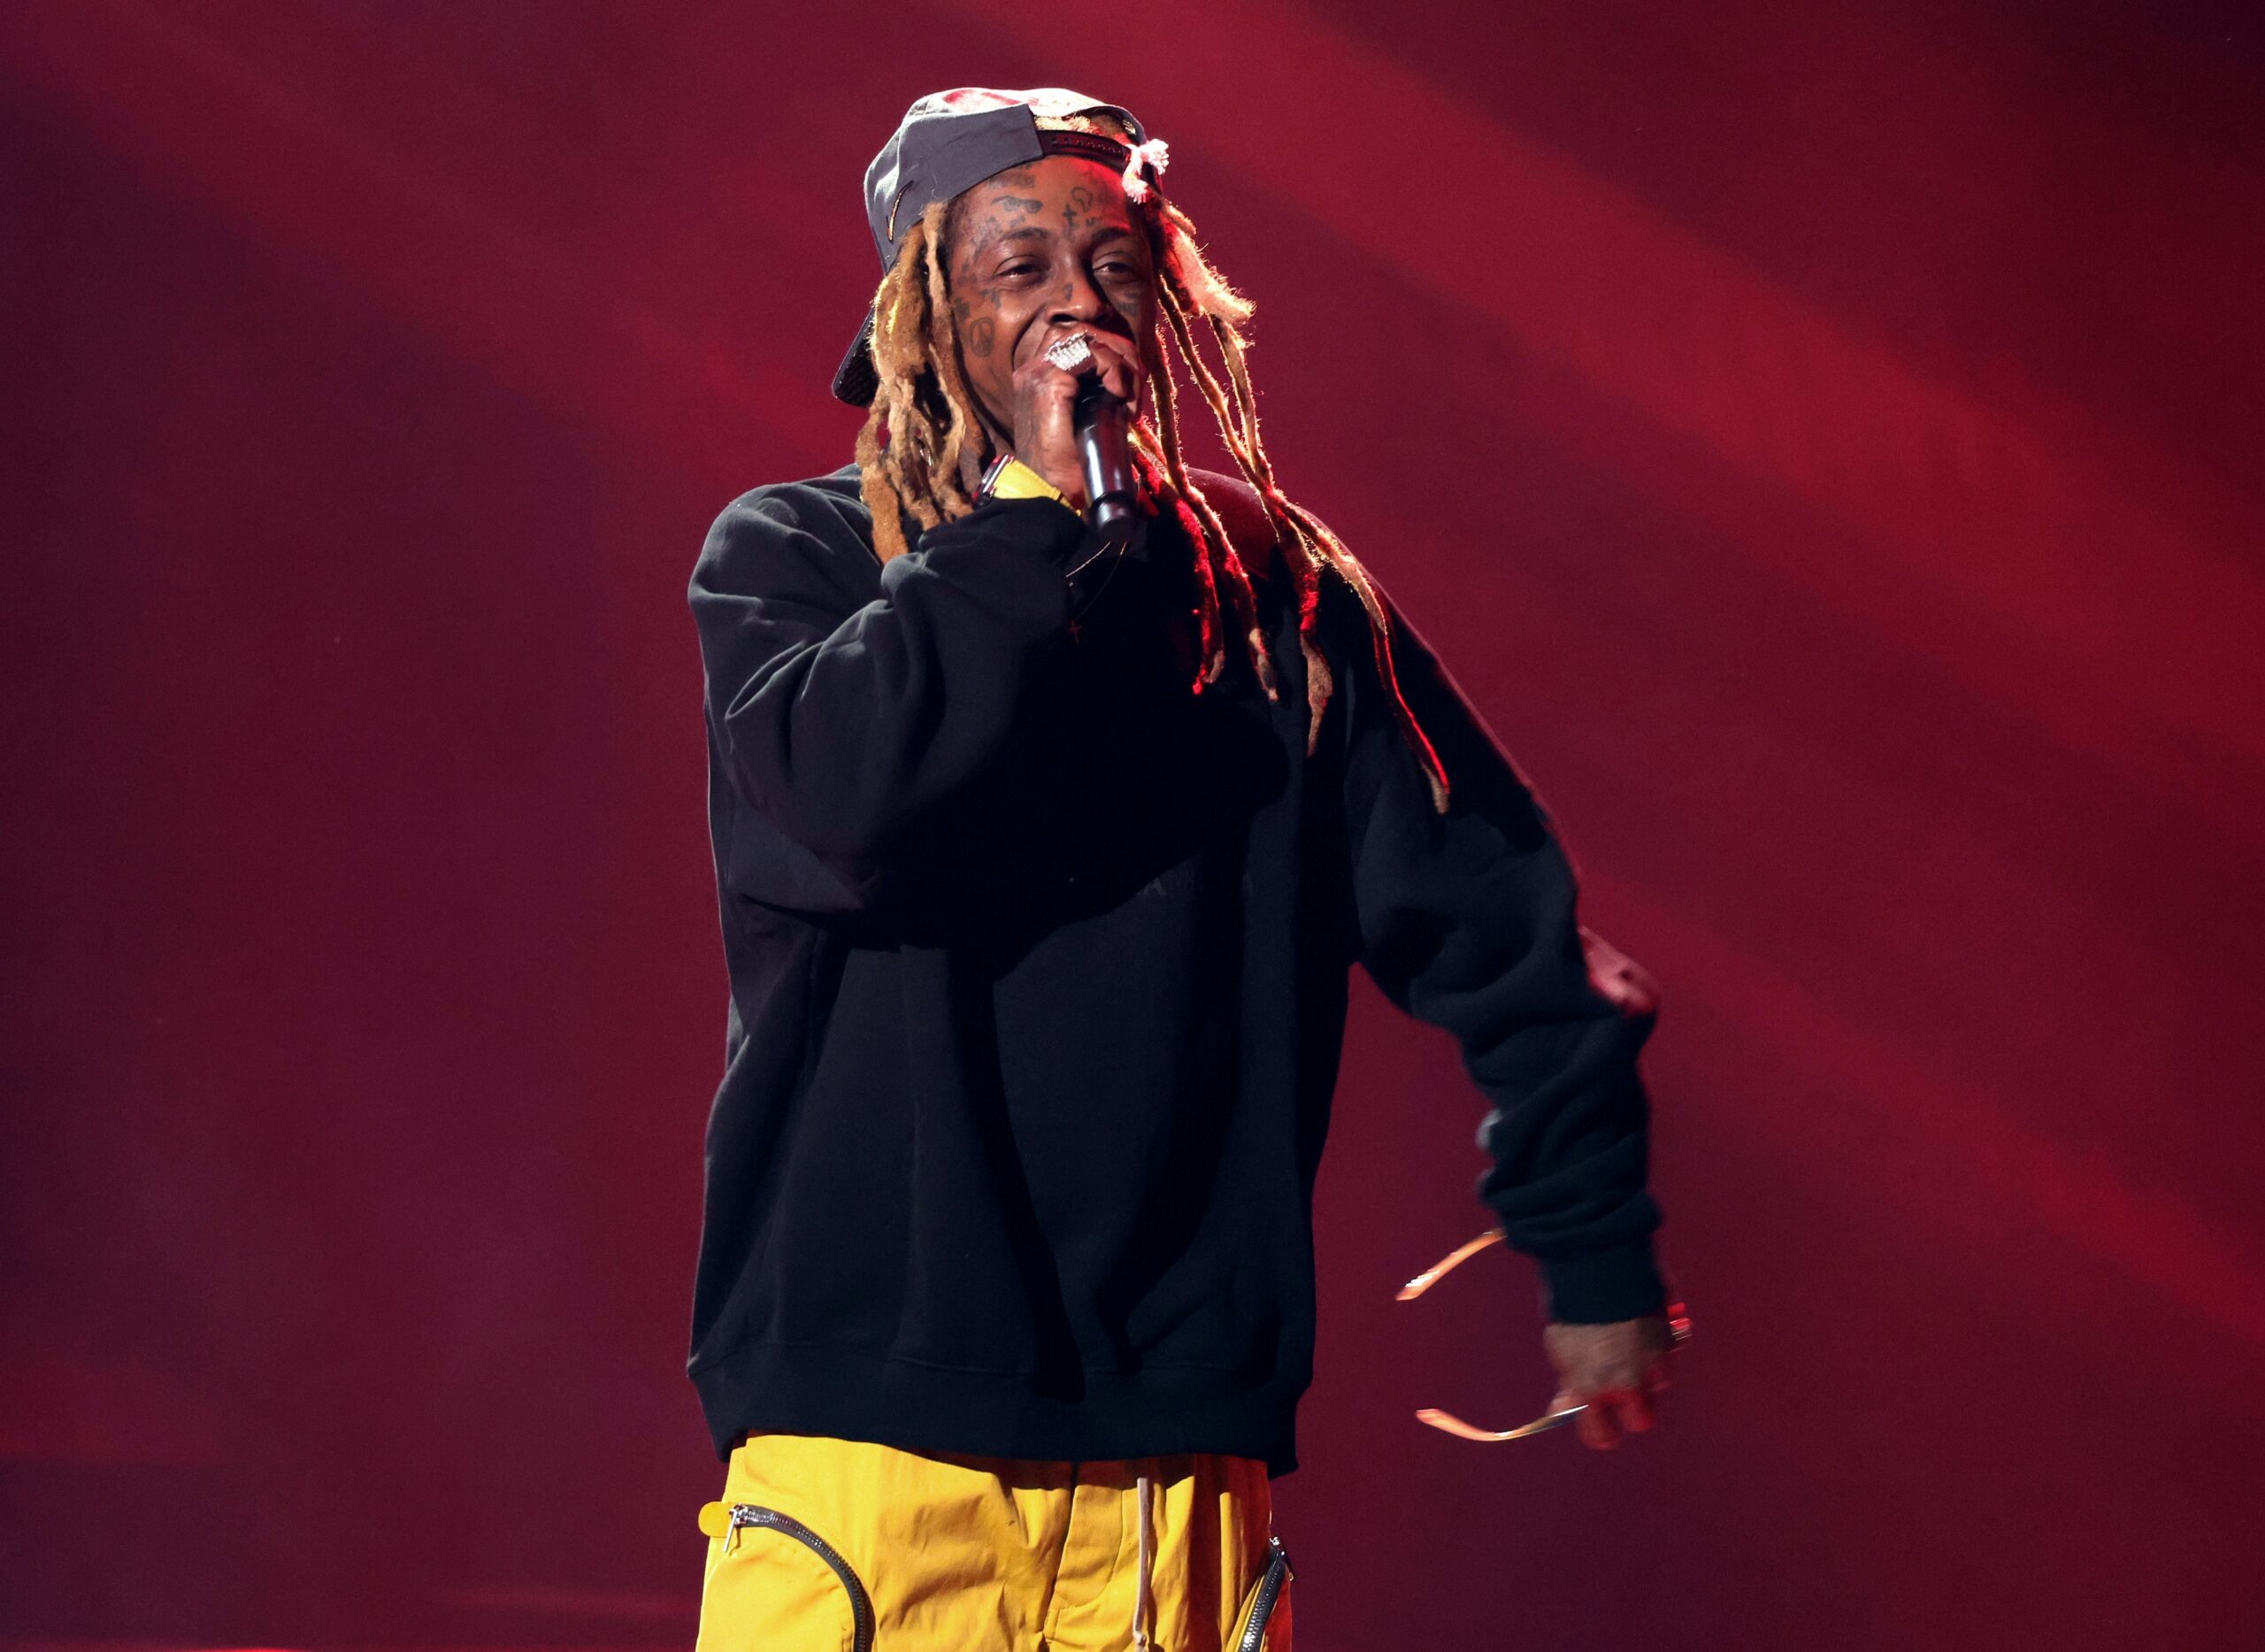 Lil Wayne Delivers Incredible "A Milli" Performance At The ESPYs Watch